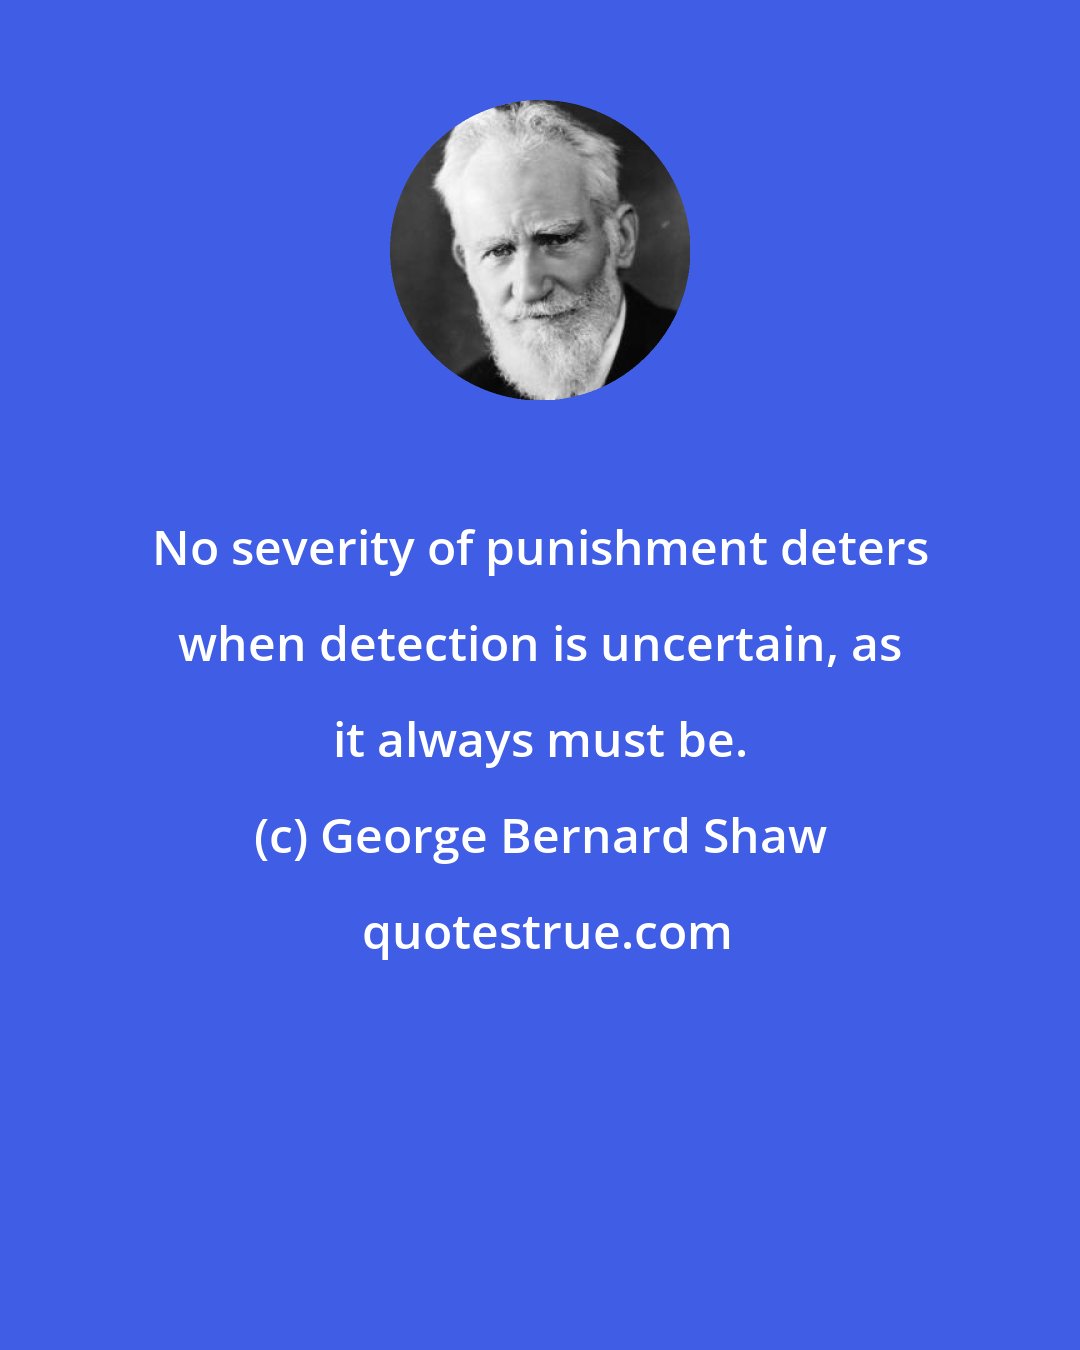 George Bernard Shaw: No severity of punishment deters when detection is uncertain, as it always must be.